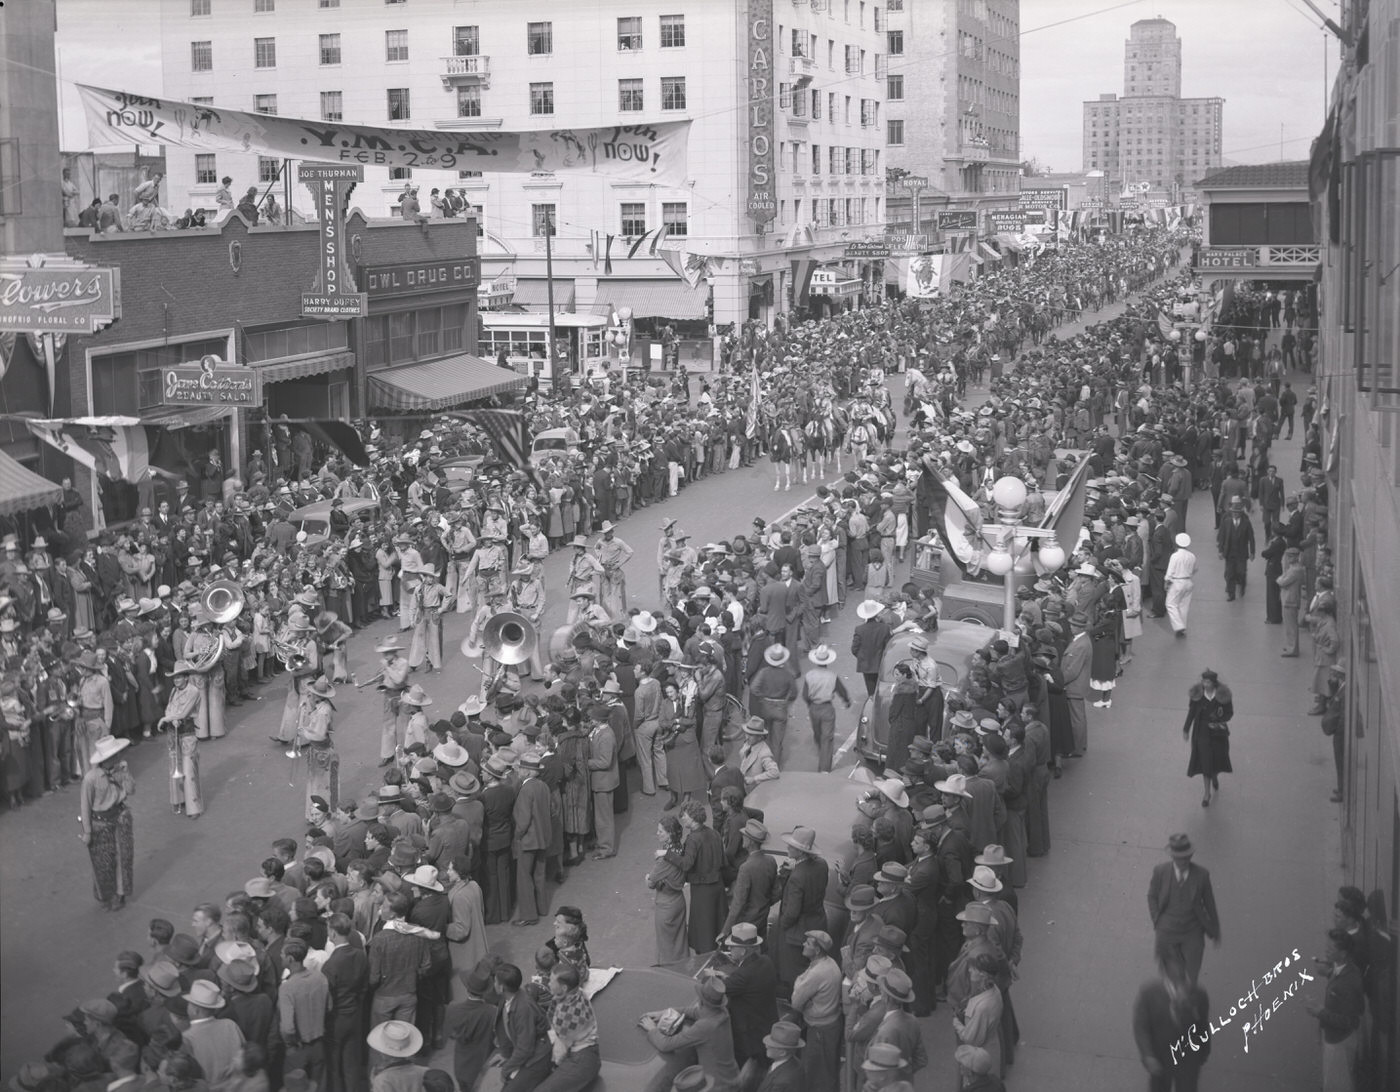 Jaycee Rodeo Parade Moving South on Central Past Monroe, 1930s